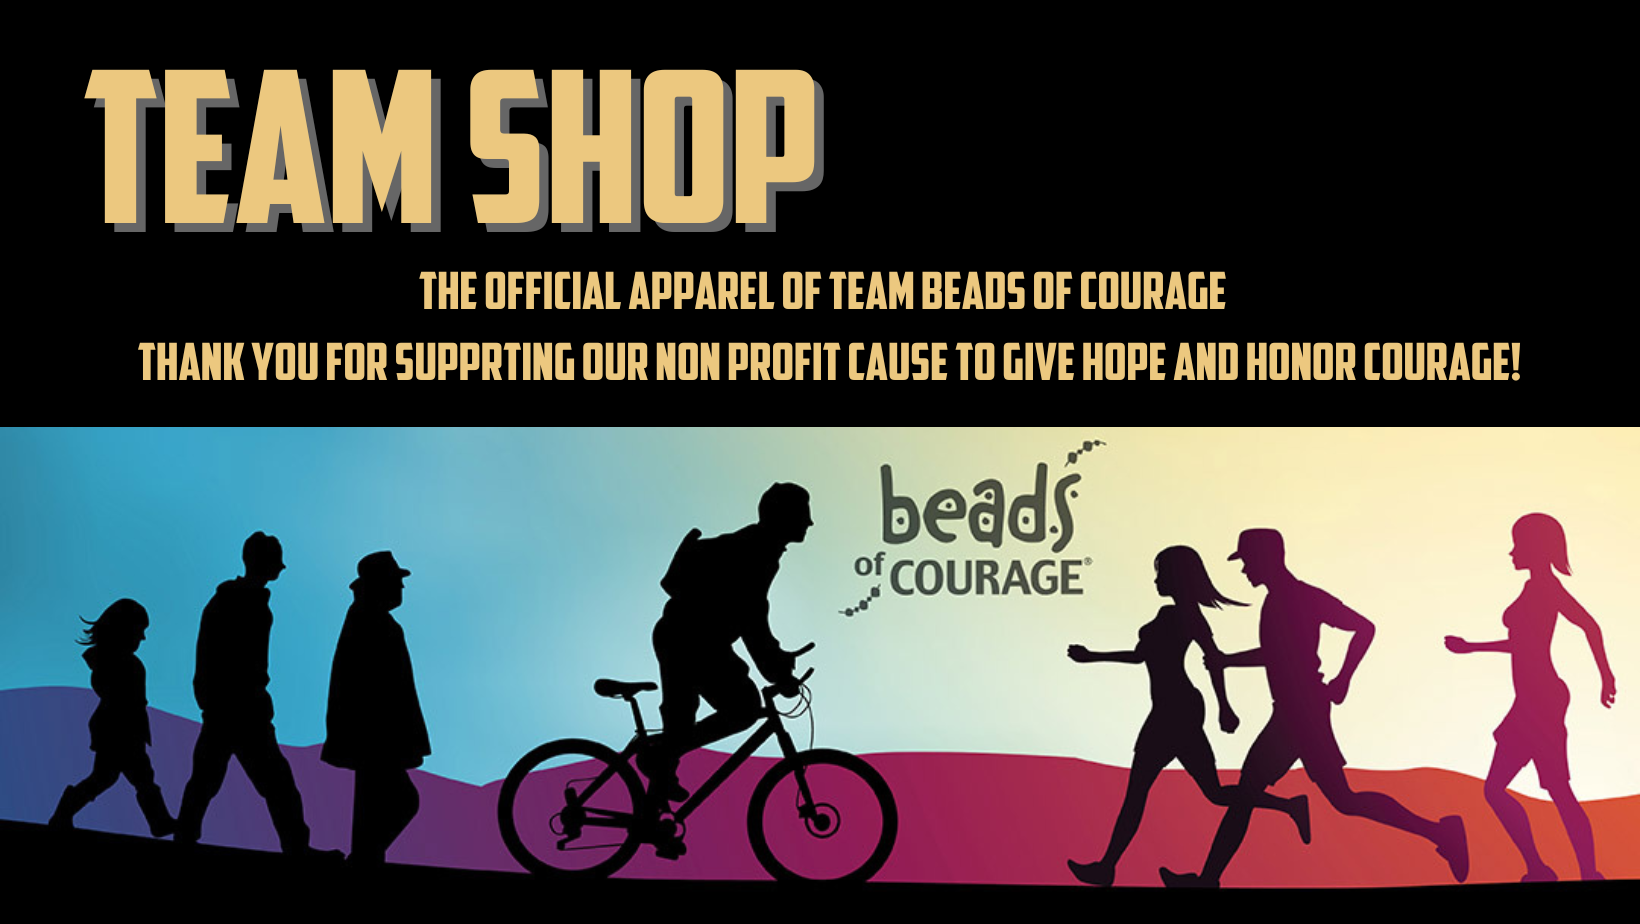 The official apparel of Team Beads of Courage.  Thank you for supporting our non-profit cause to give hope and honor courage!